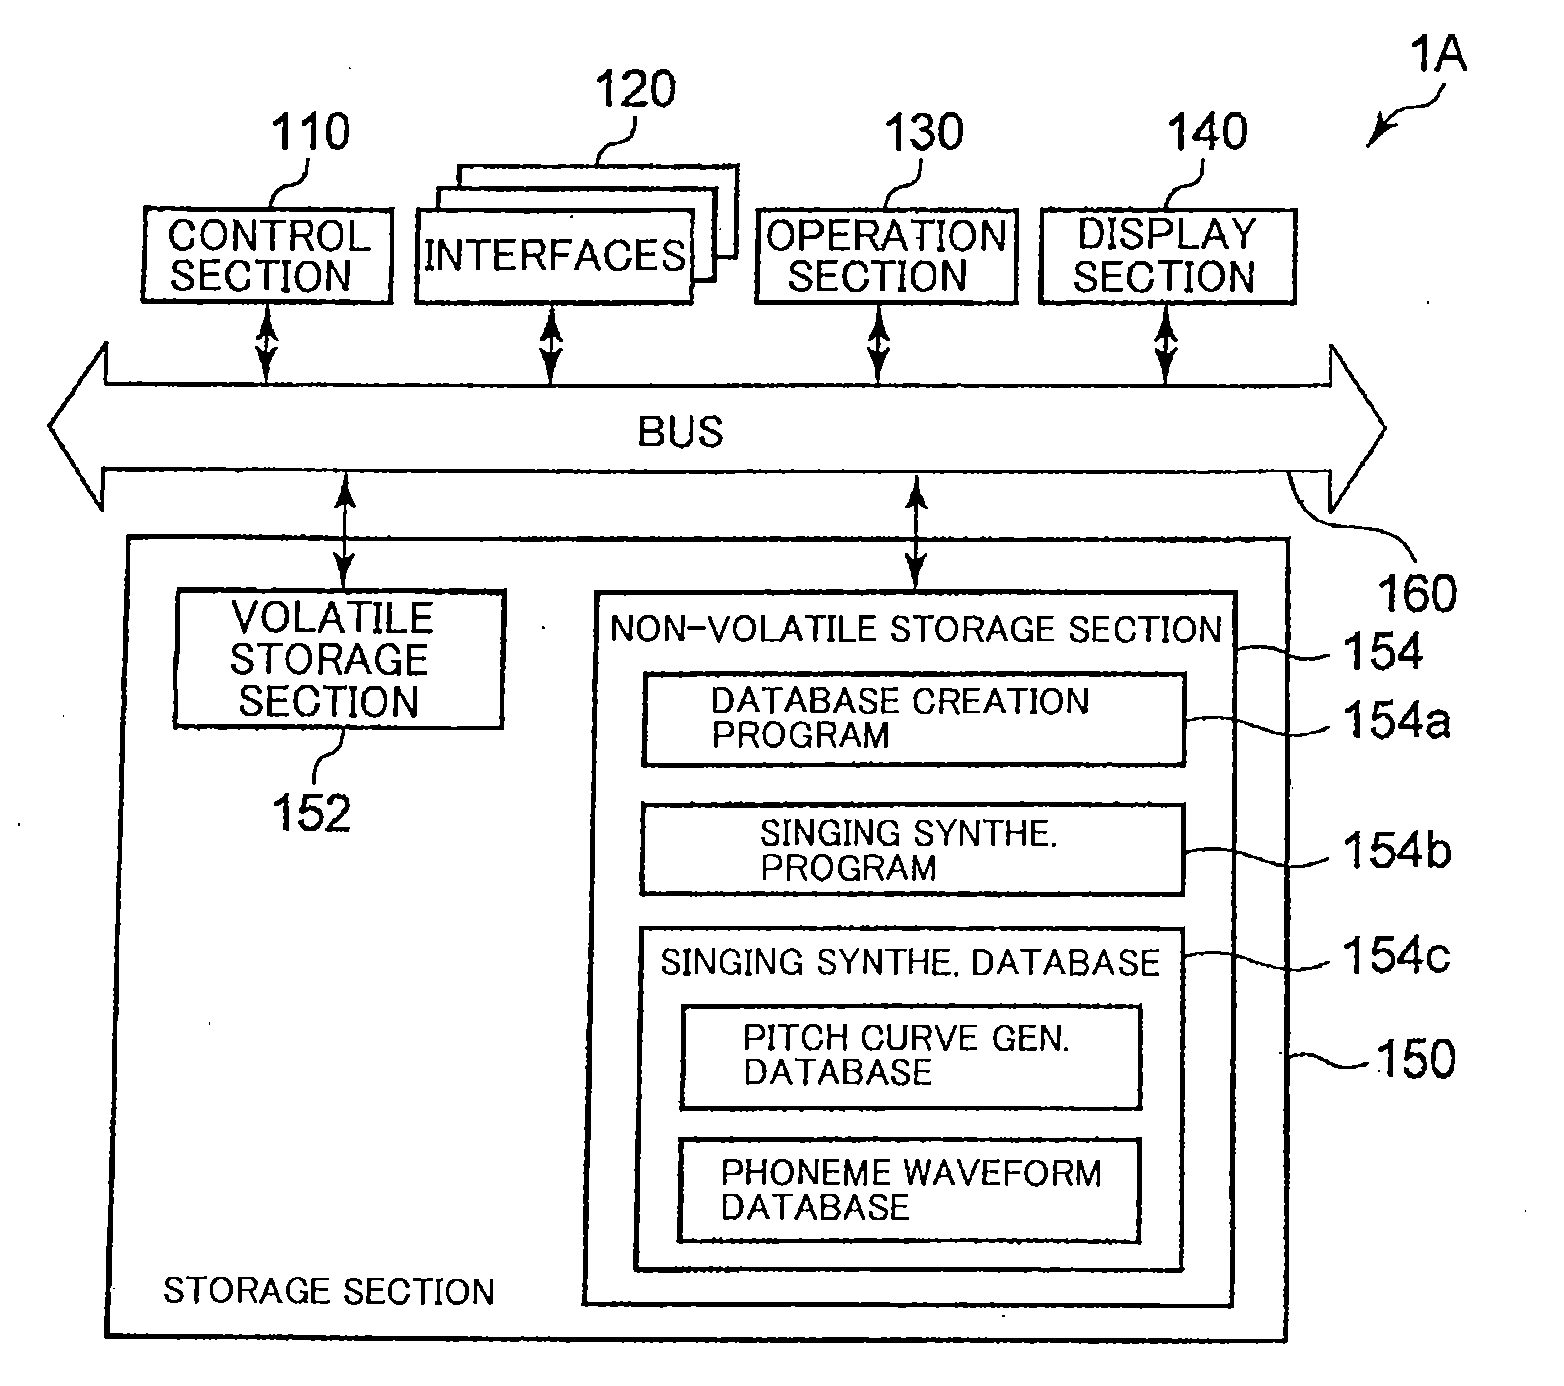 Apparatus and Method for Creating Singing Synthesizing Database, and Pitch Curve Generation Apparatus and Method